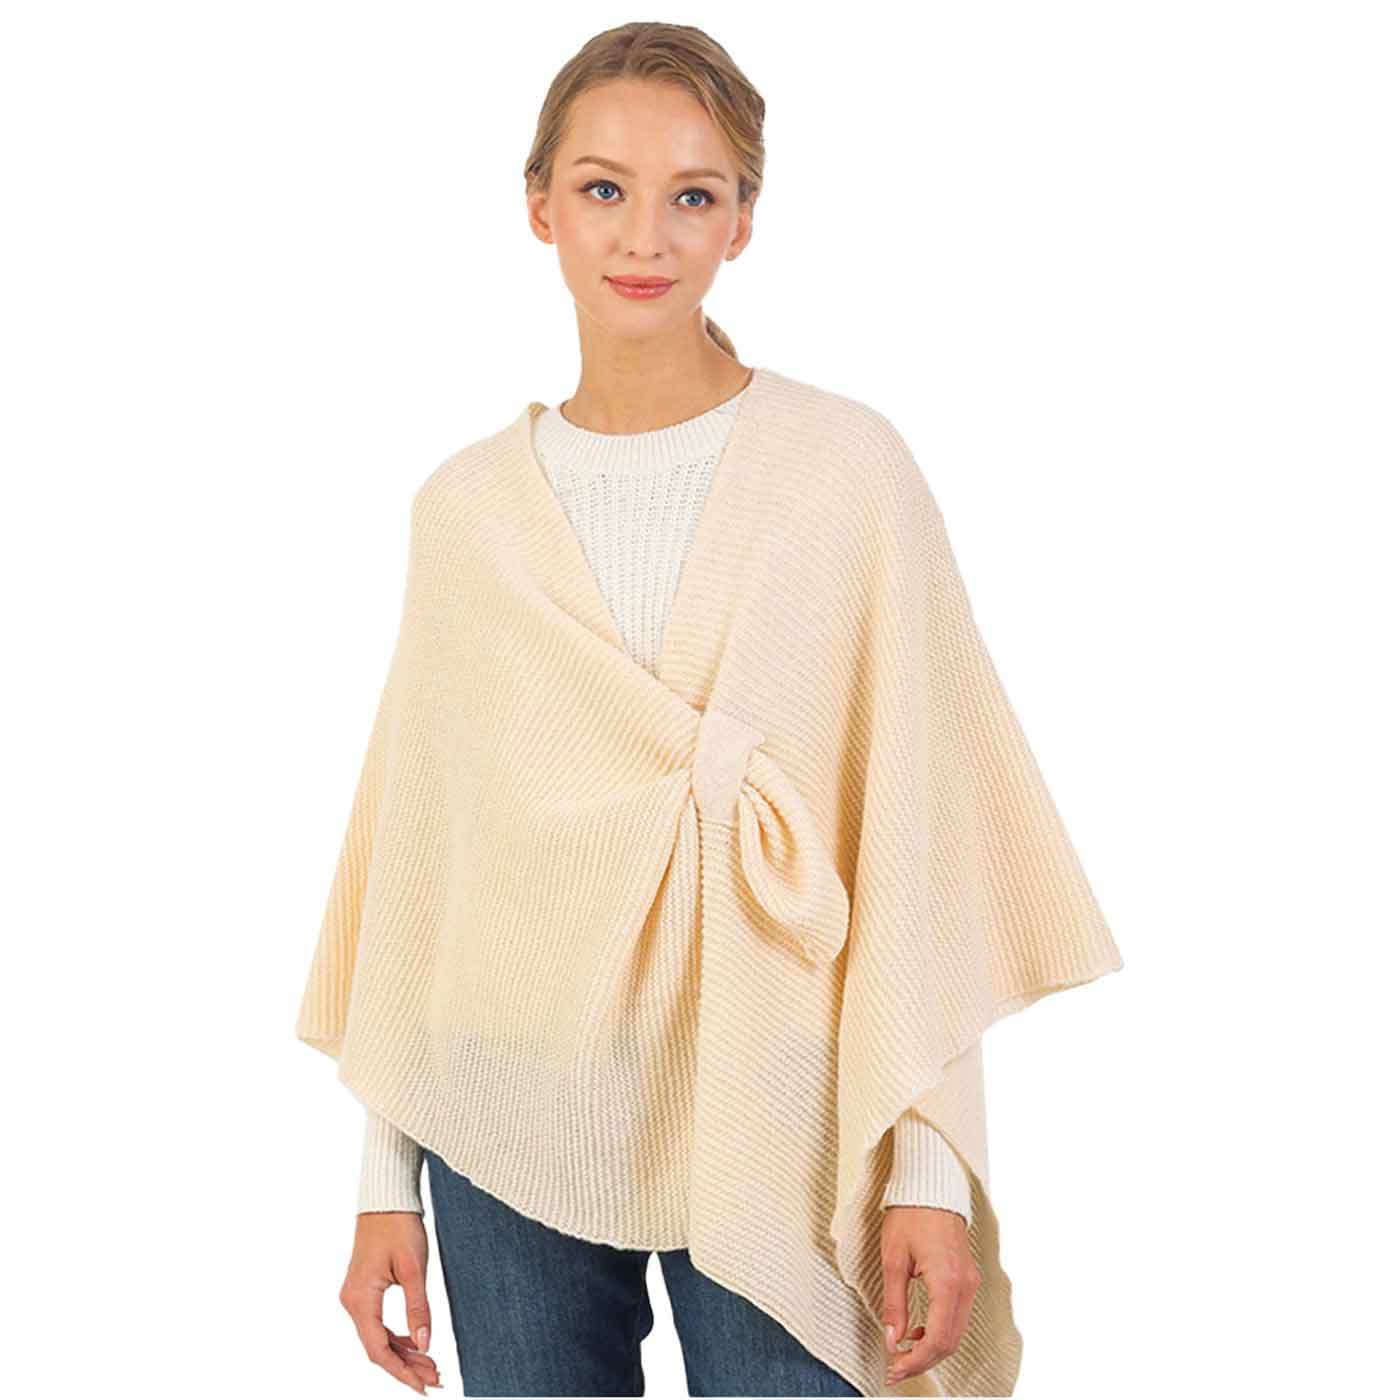 Cream  Solid Knitted Basic Cape, is beautifully designed with solid color that amps up your beauty to a greater extent. It enriches your attire with perfect combination. Breathable Fabric, comfortable to wear, and very easy to put on and off. Suitable for Weekend, Work, Holiday, Beach, Party, Club, Night, Evening, Date, Casual and Other Occasions in Spring, Summer and Autumn. Perfect Gift for Wife, Mom, Birthday, Holiday, Anniversary, Fun Night Out.